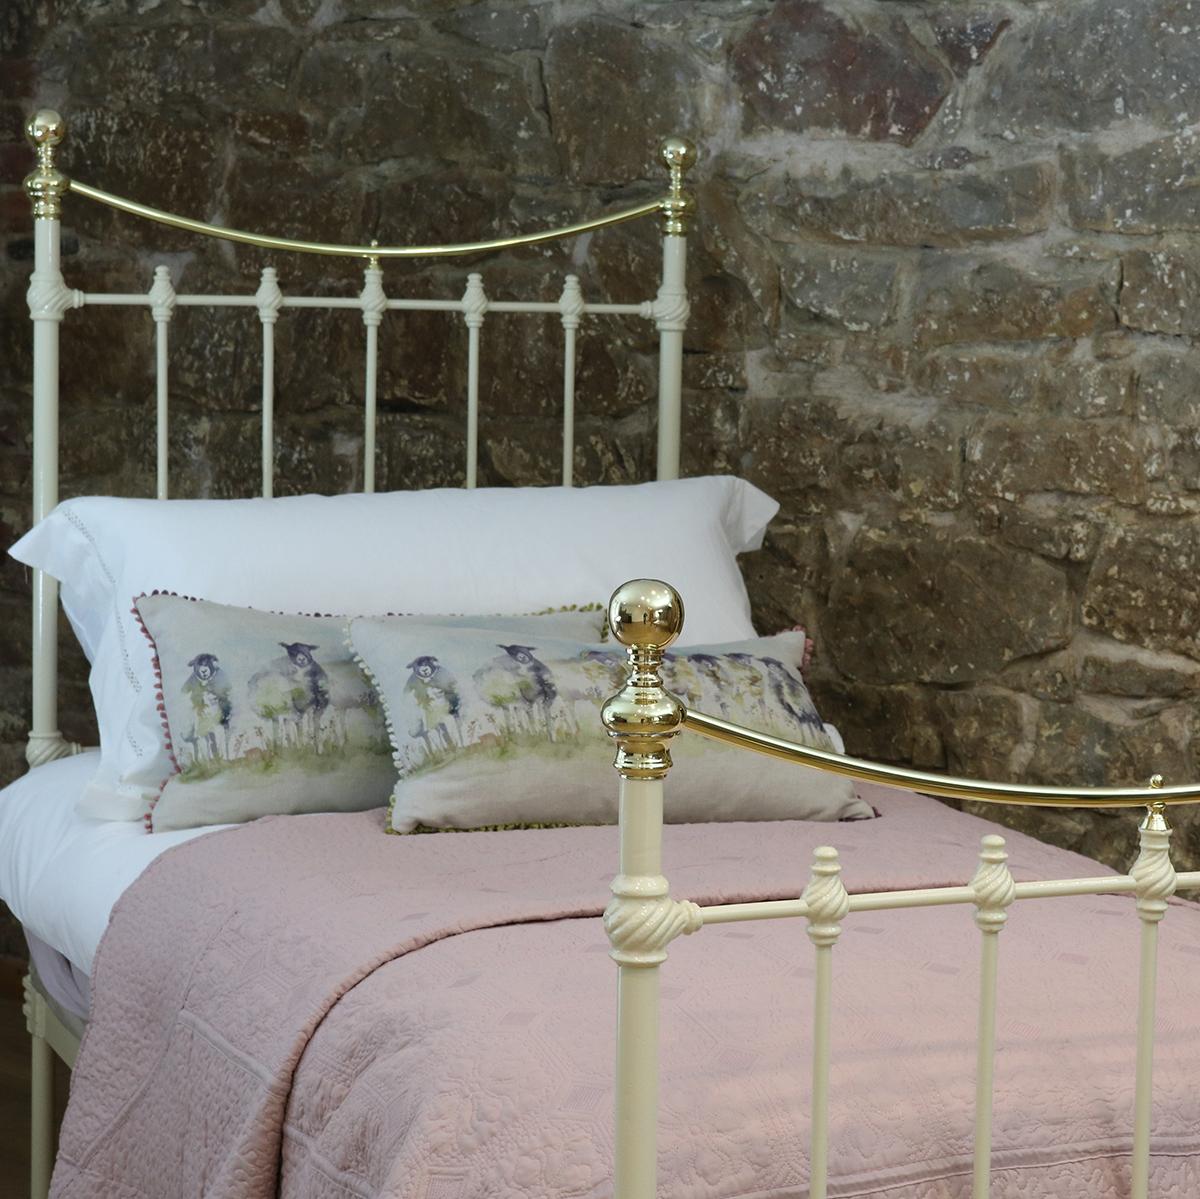 Victorian cast iron bedstead with pretty cast panel design.

This bed accepts a 3ft wide base and mattress set.

The price is for the bed frame alone. The base, mattress, bedding and linen are extra and can be supplied.